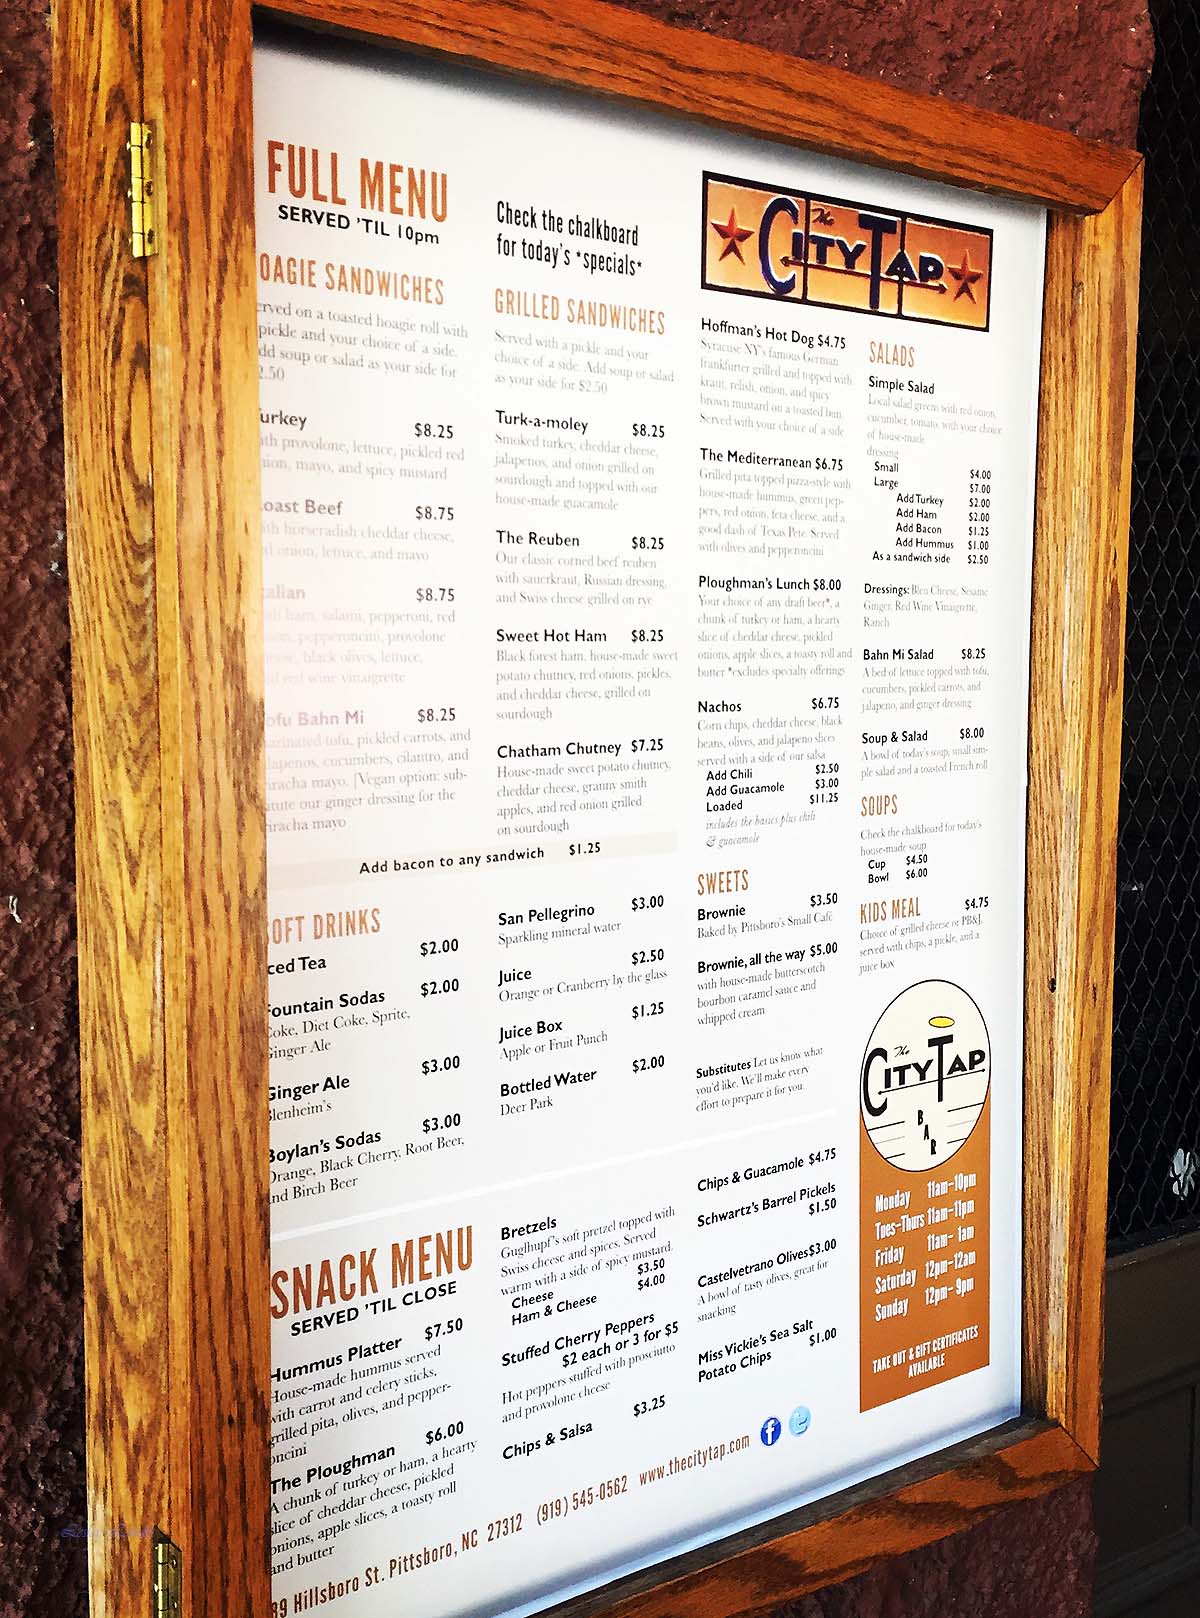 The menu board for the City Tap.